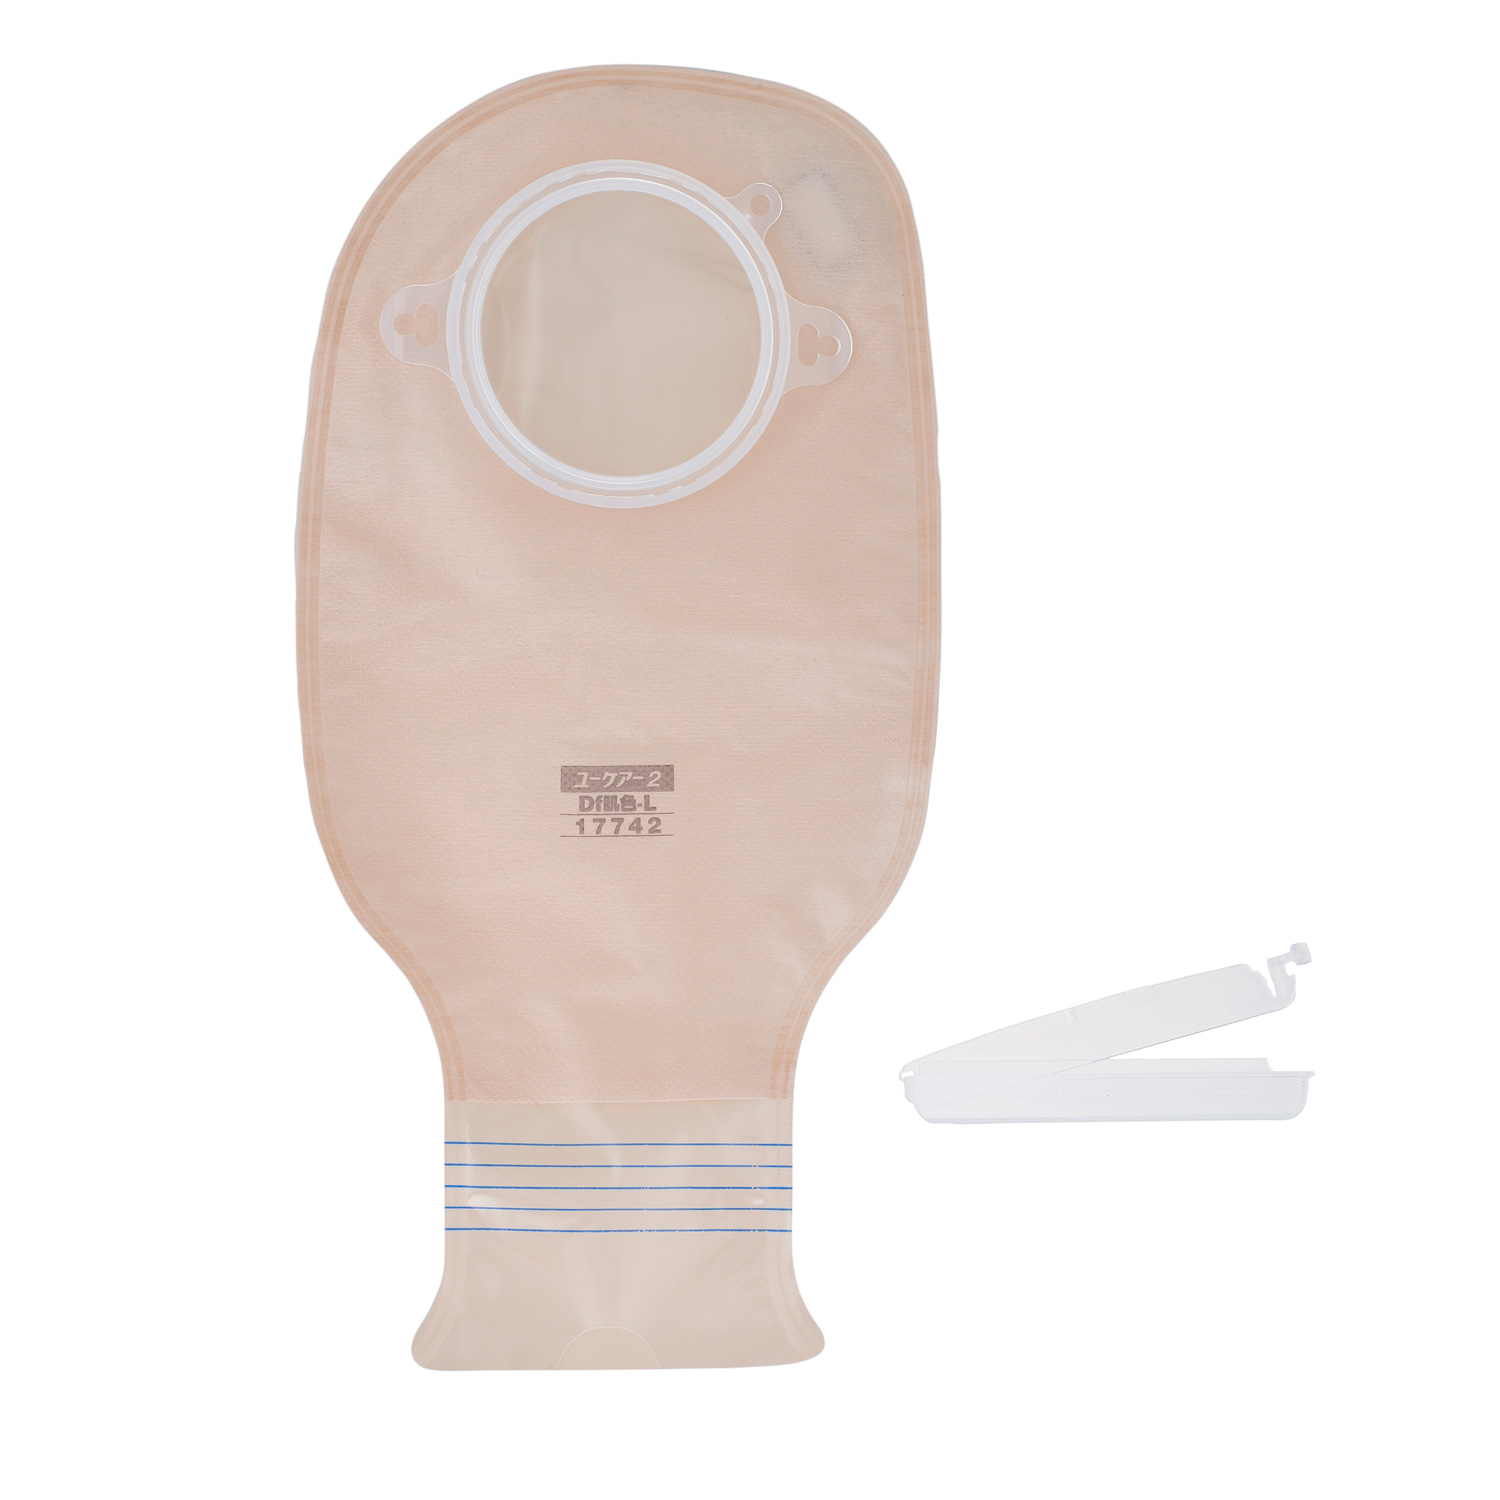 COLOSTOMY BAG (2 PIECE SYSTEM) YOUCARE 2DF - WITH FILTER - FLESH COLOR BAG